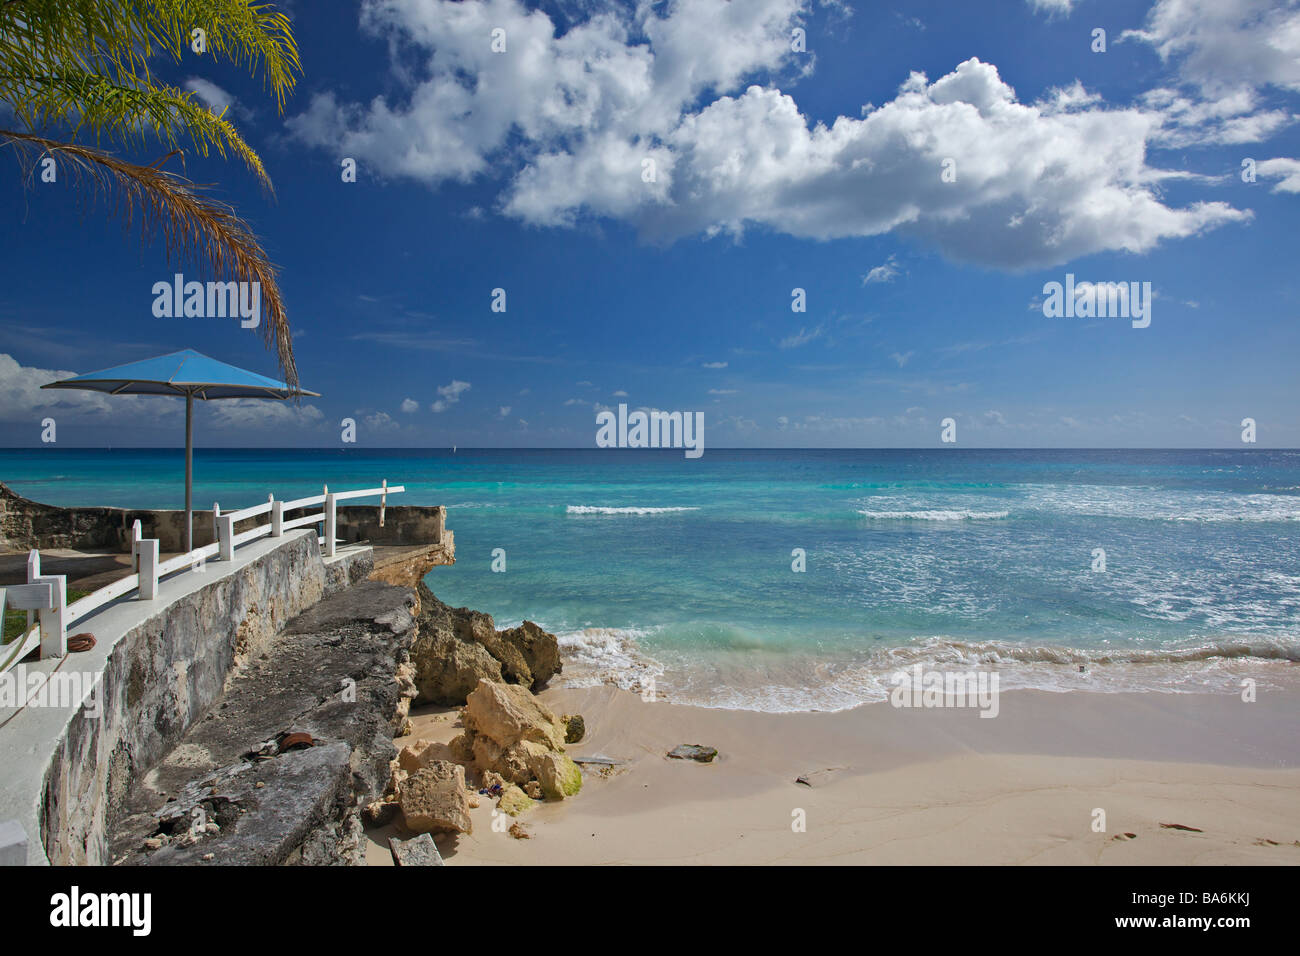 Dover beach at St. Lawrence Gap or "The Gap", Barbados, "West Indies" Stock Photo